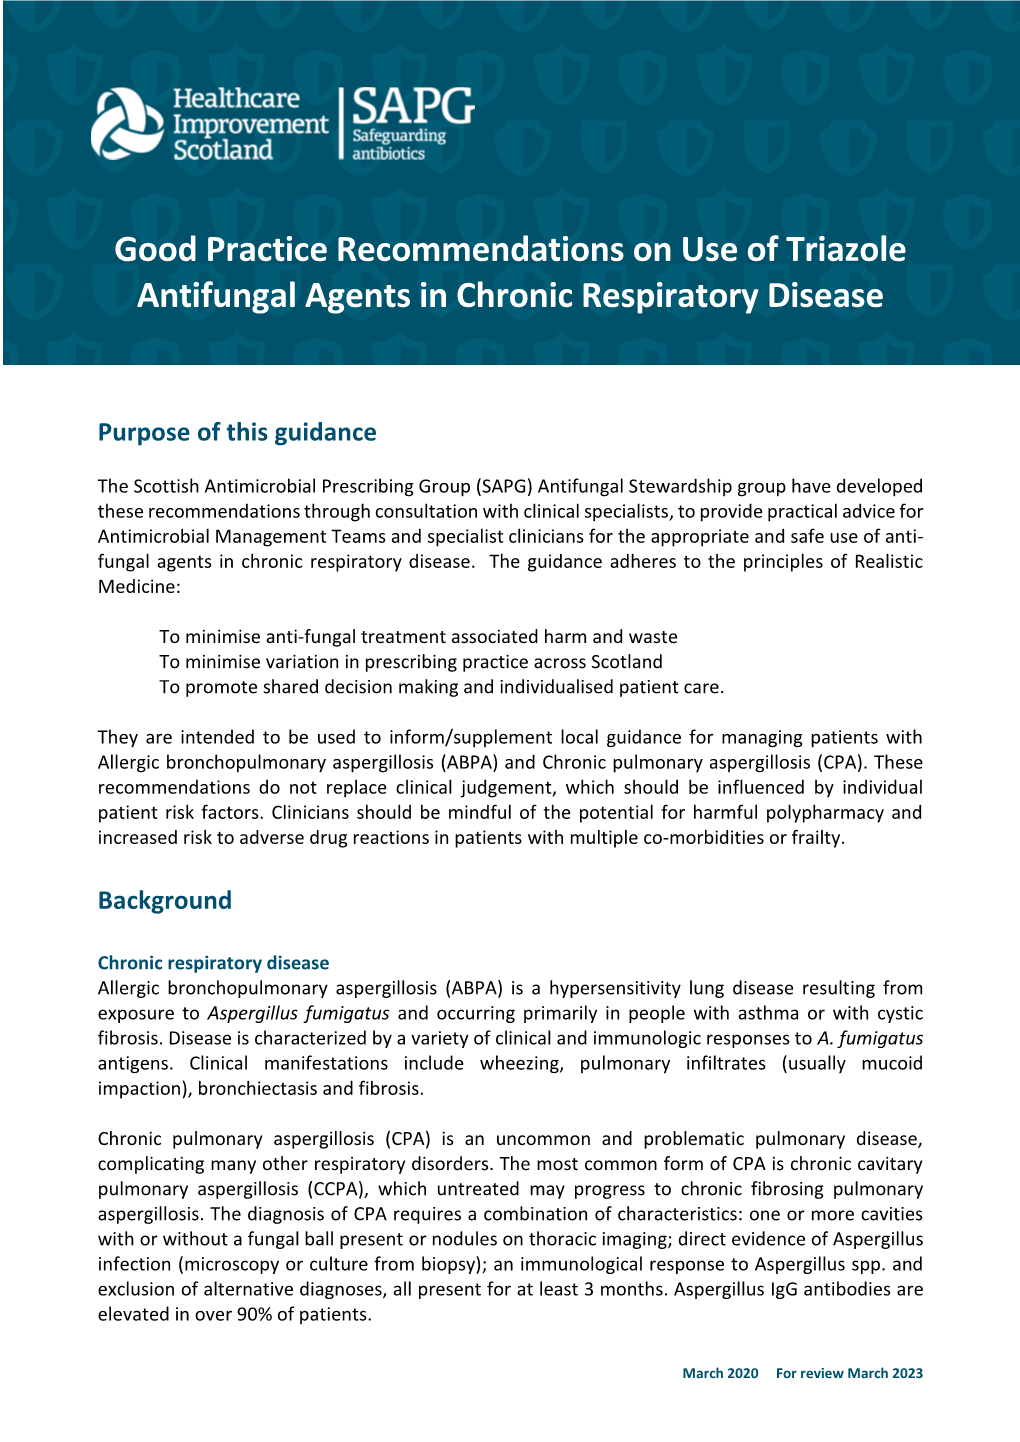 Good Practice Recommendations on Use of Triazole Antifungal Agents in Chronic Respiratory Disease